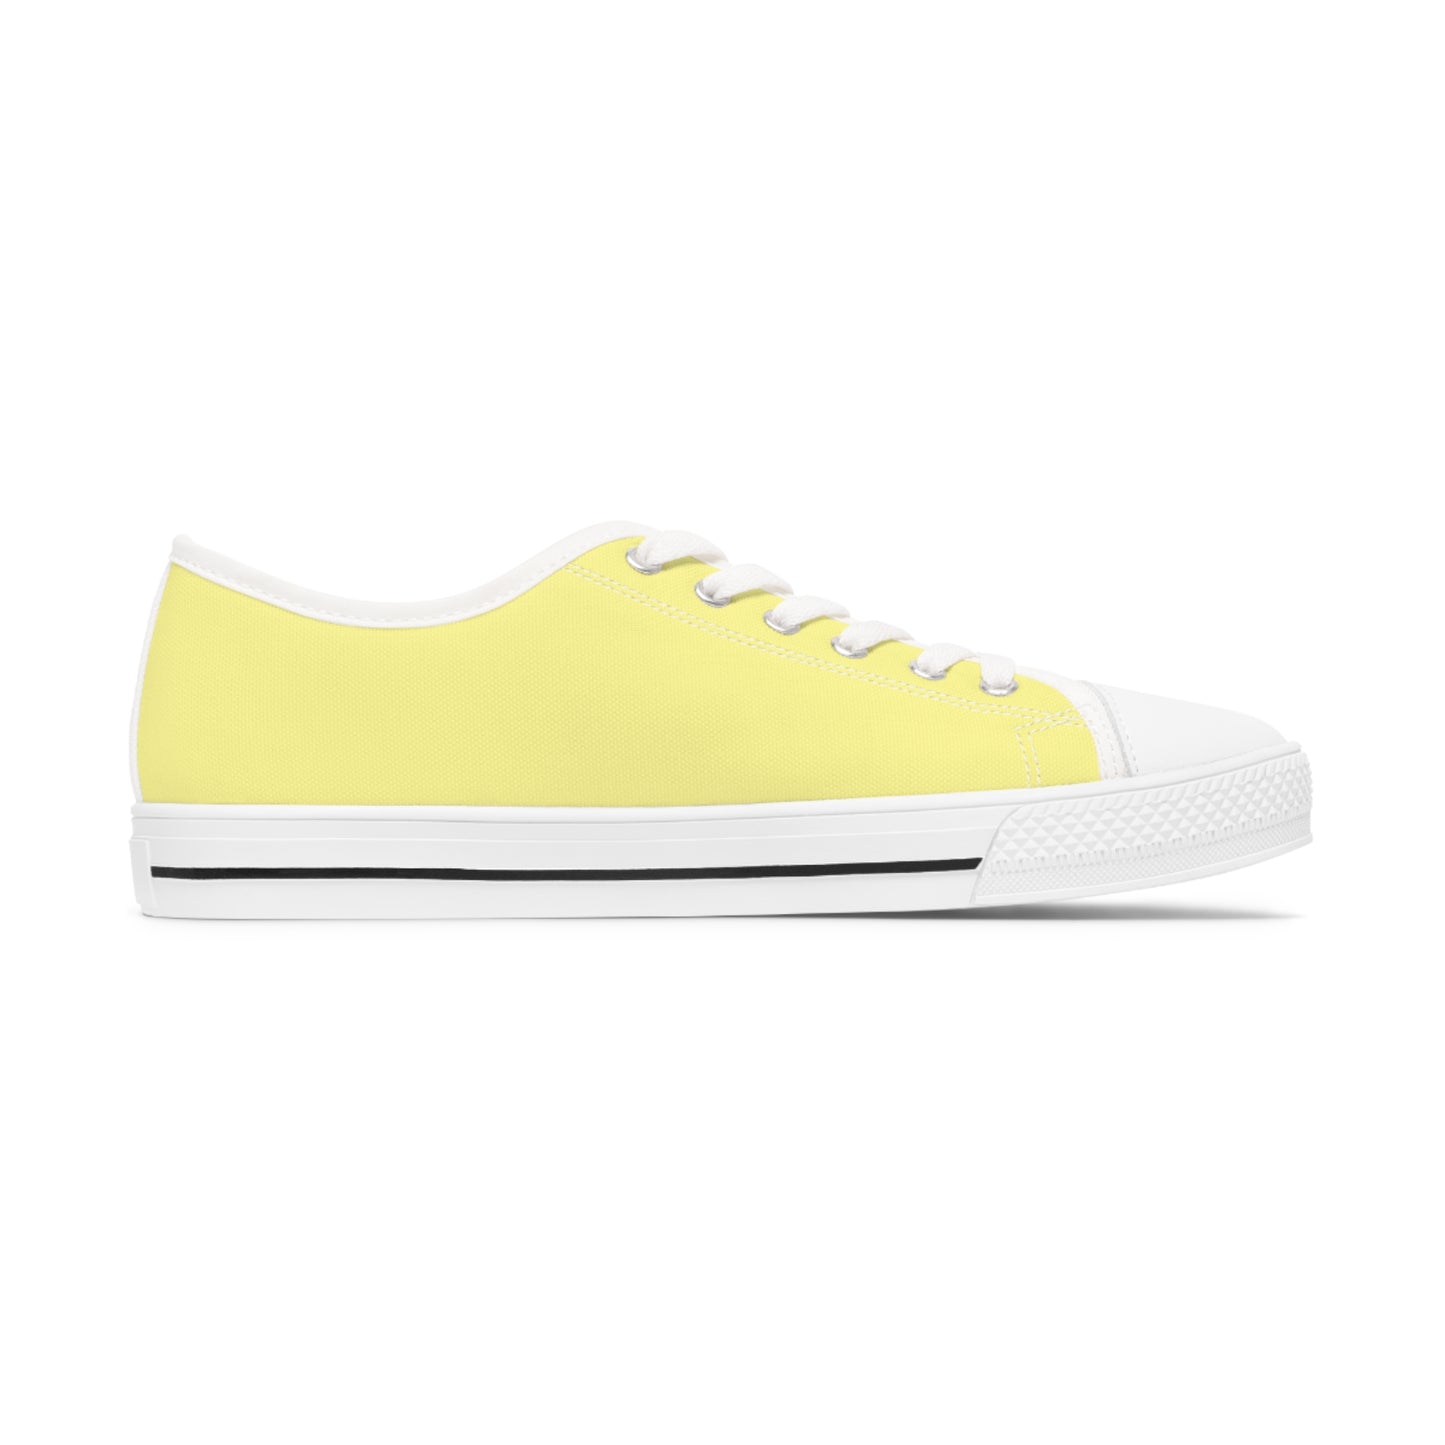 Women's Canvas Low Top Solid Color Sneakers - Lemon Yellow US 12 White sole